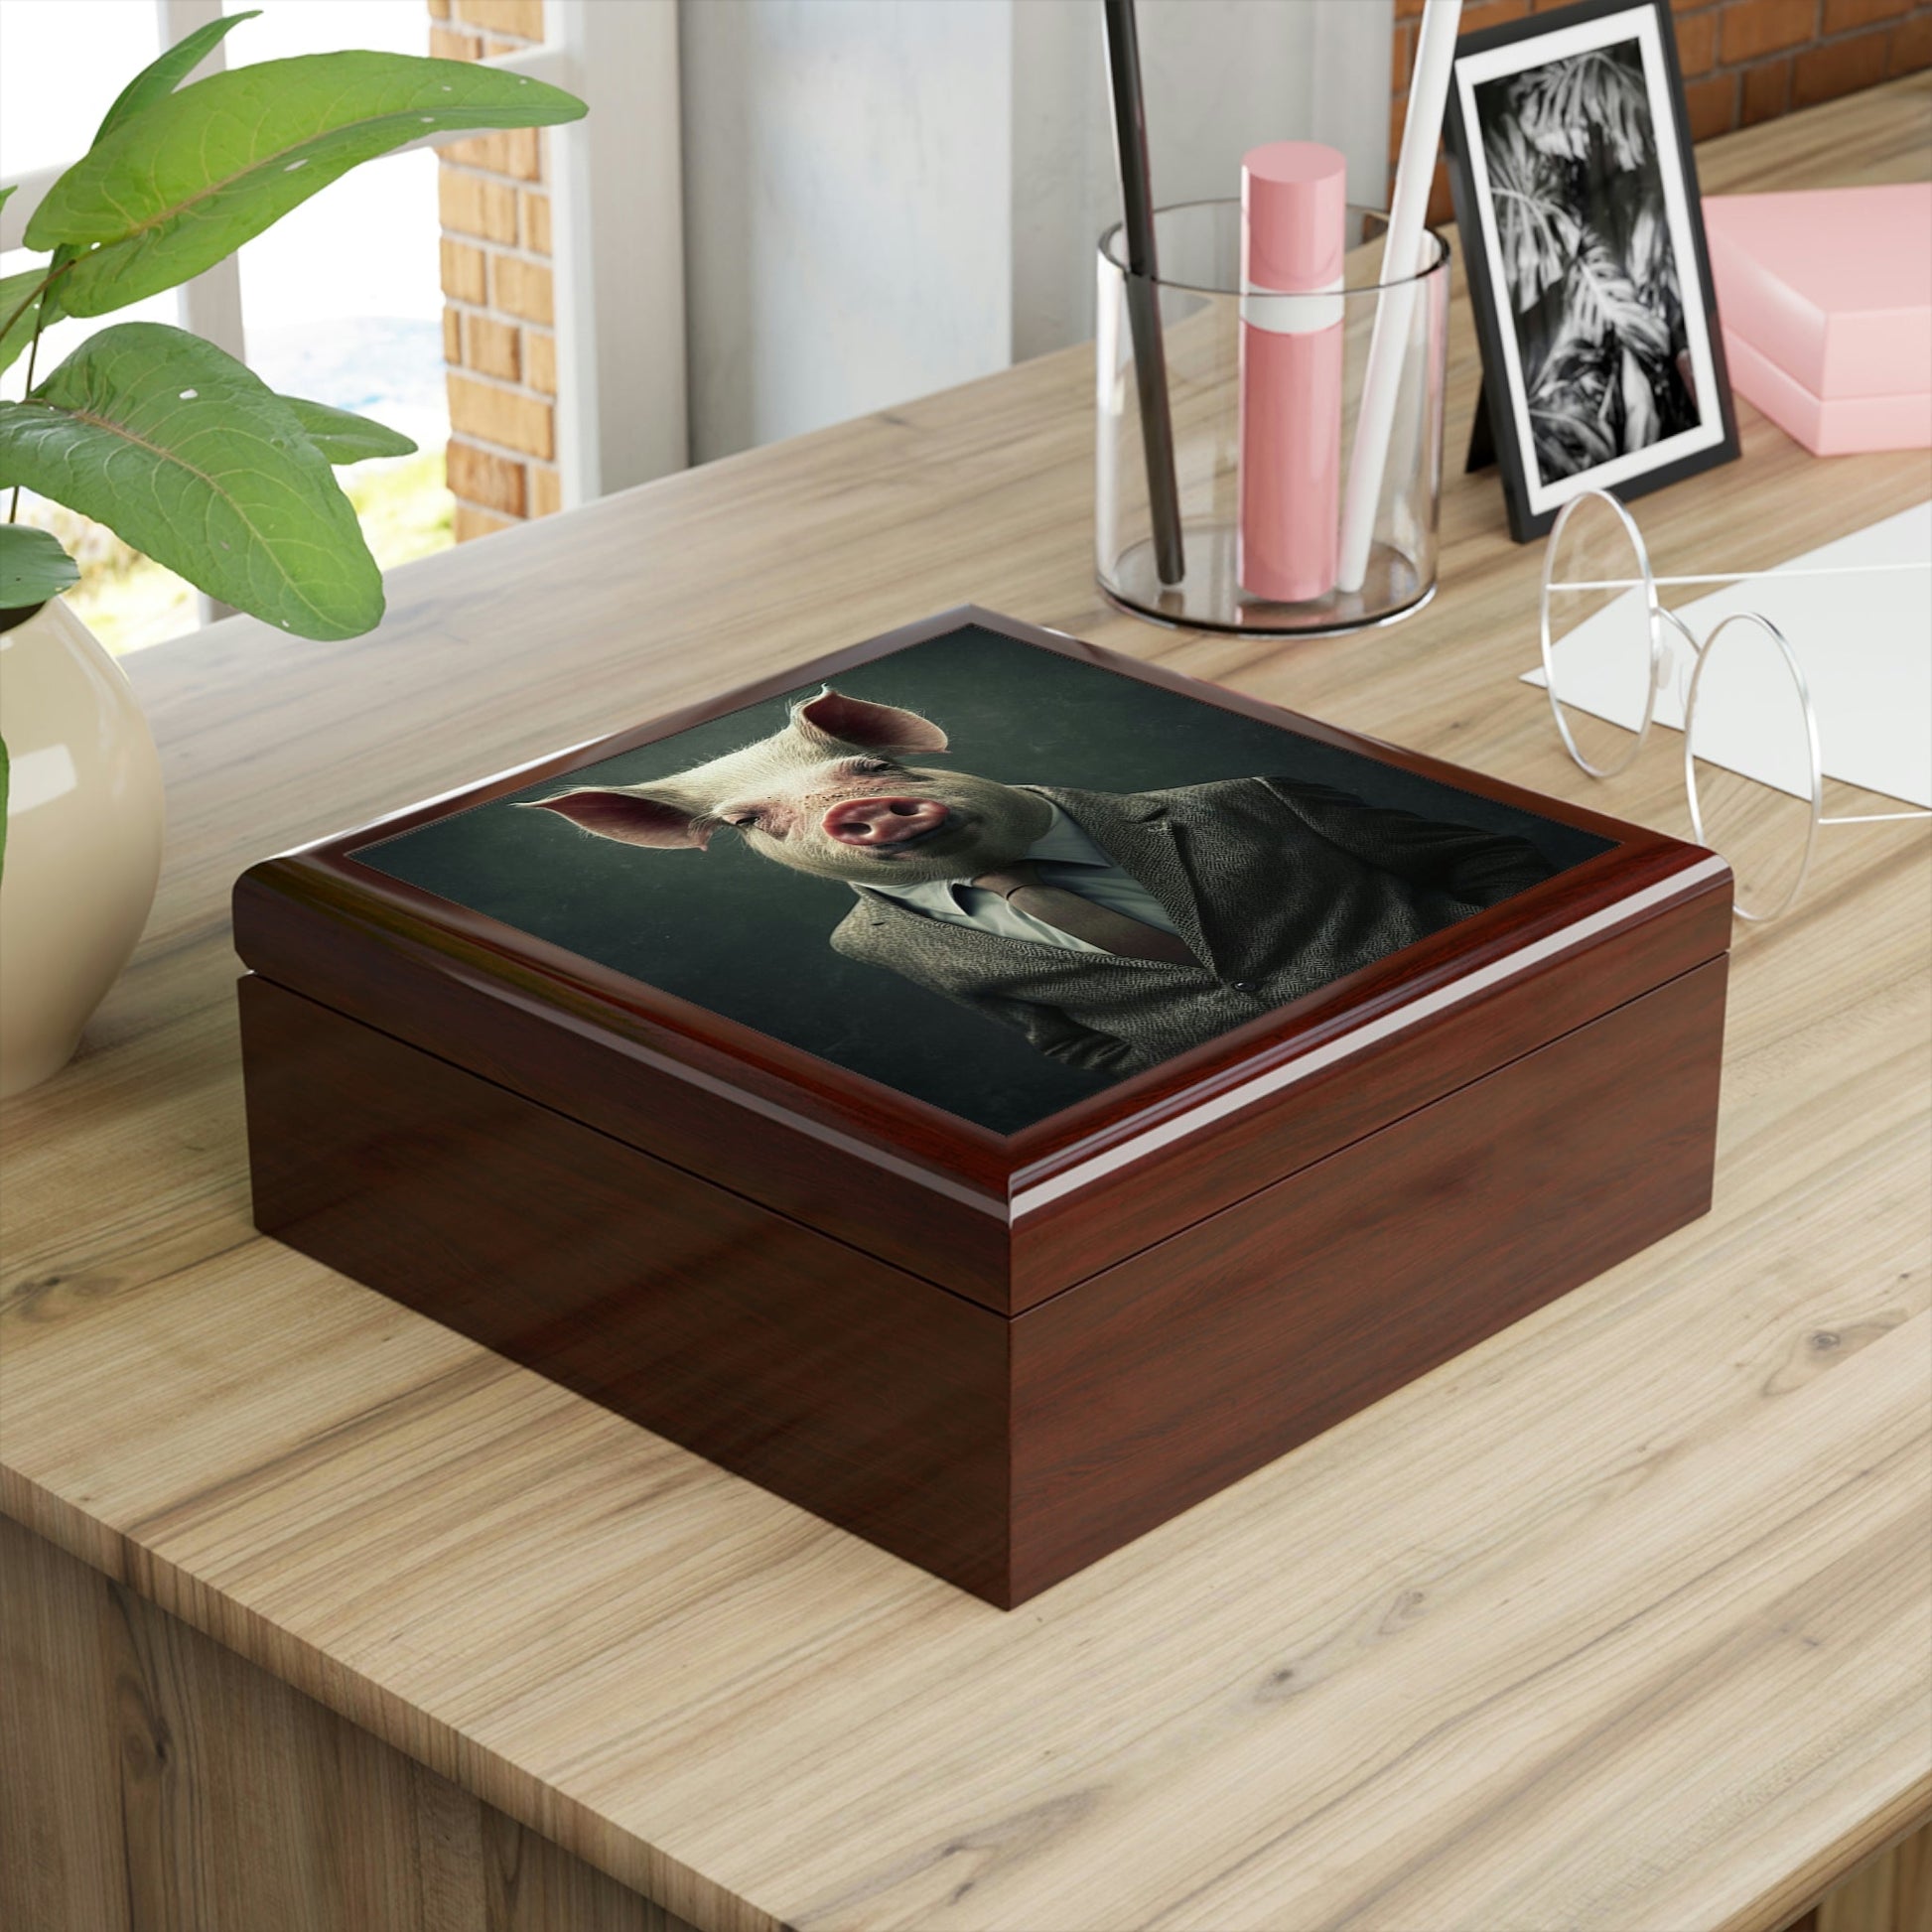 Mr. Pig Wooden Keepsake Jewelry Box with Ceramic Tile Cover